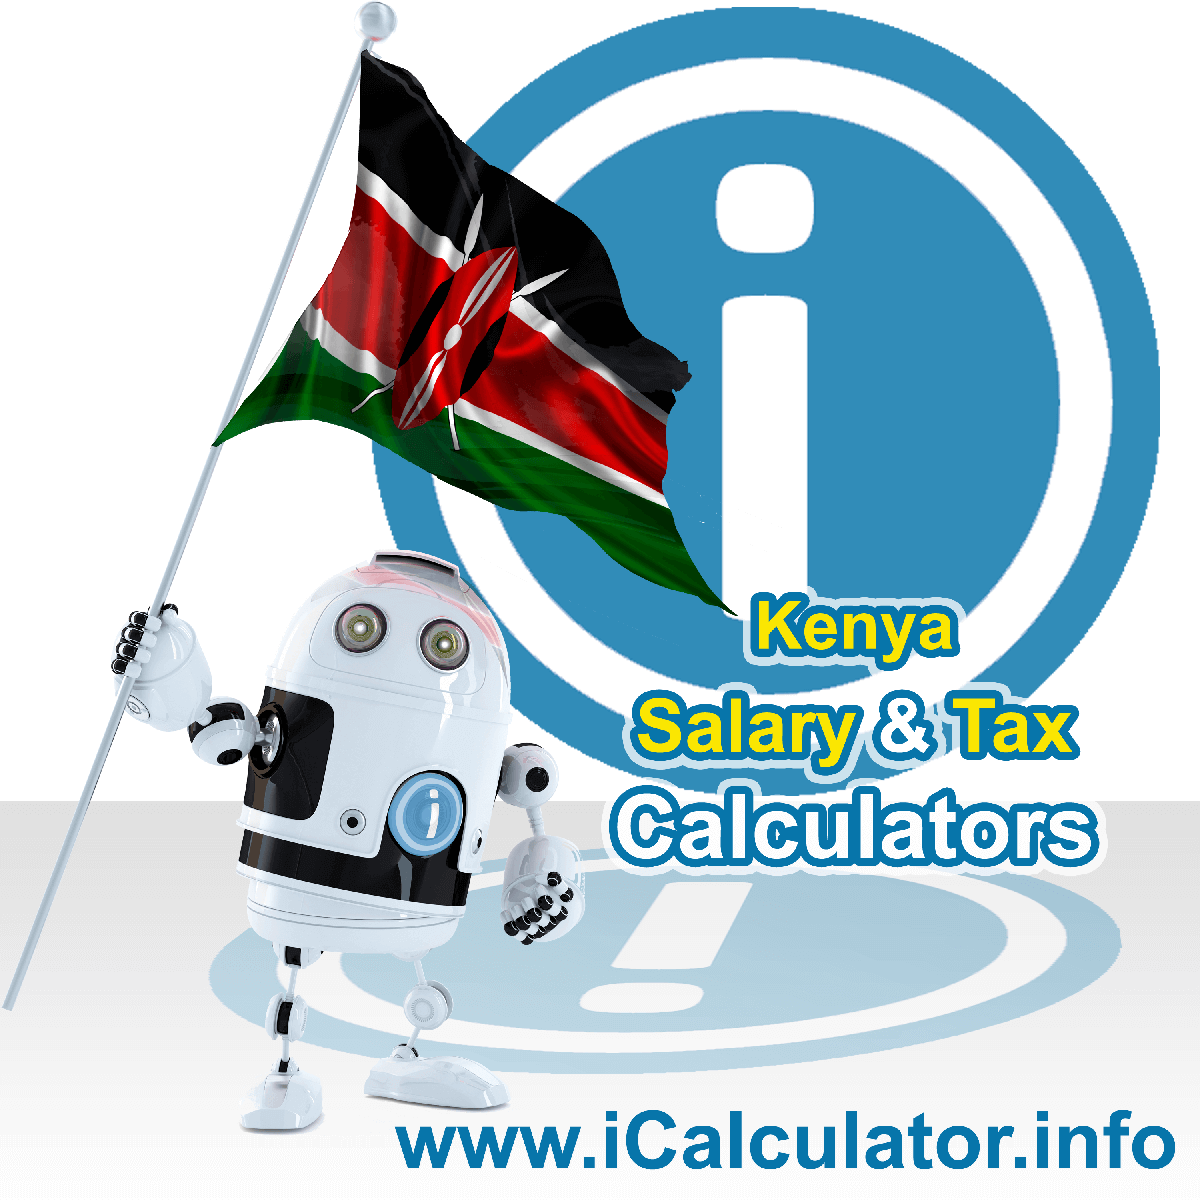 Kenya Tax Calculator. This image shows the Kenya flag and information relating to the tax formula for the Kenya Salary Calculator